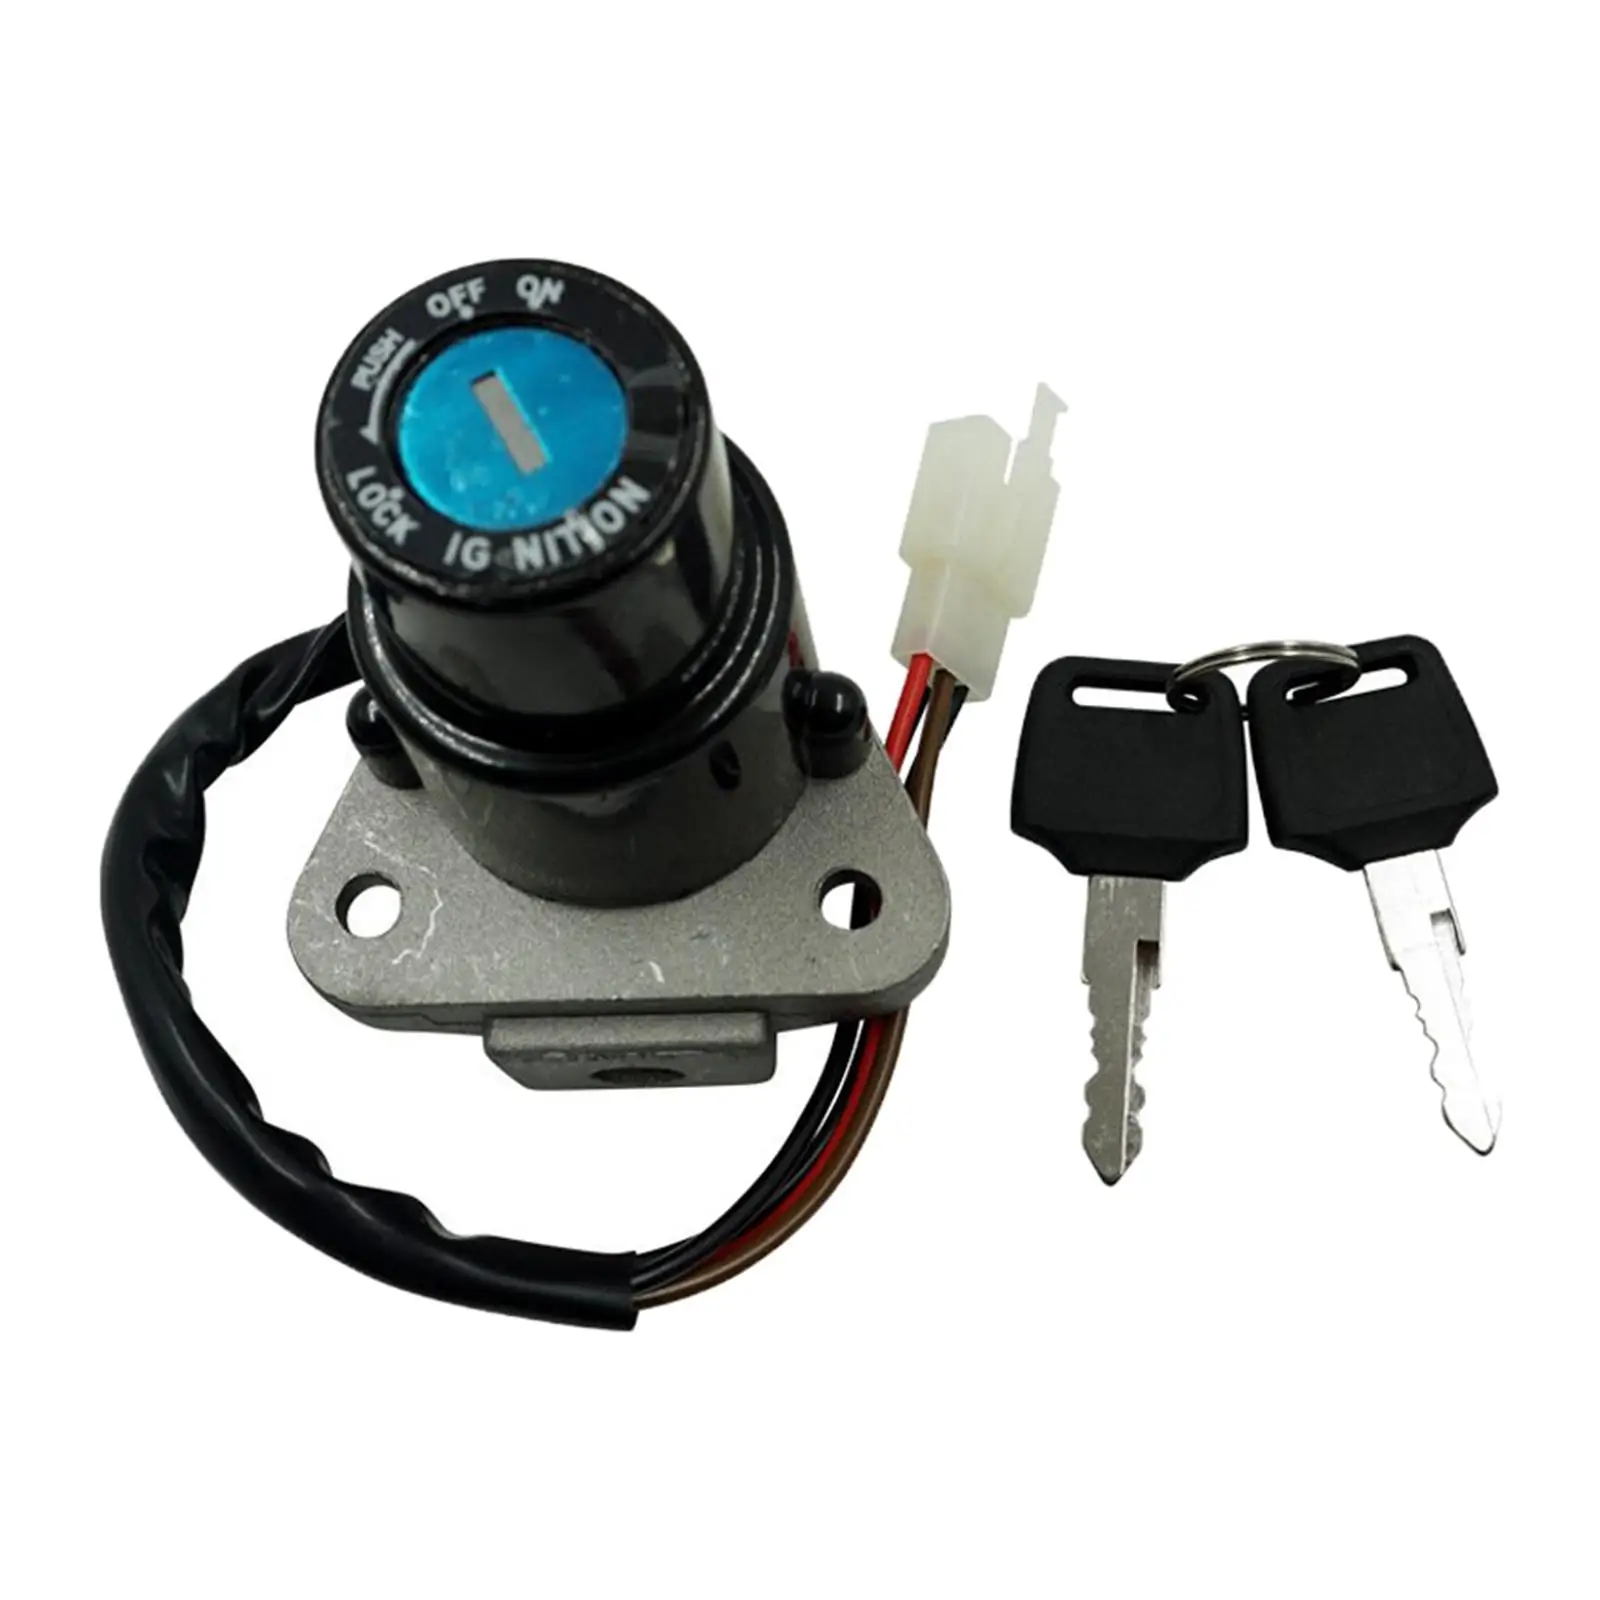 Motorbike Ignition Switch Key Accessories Fit for Yamaha DT125 Tzr250 TW225